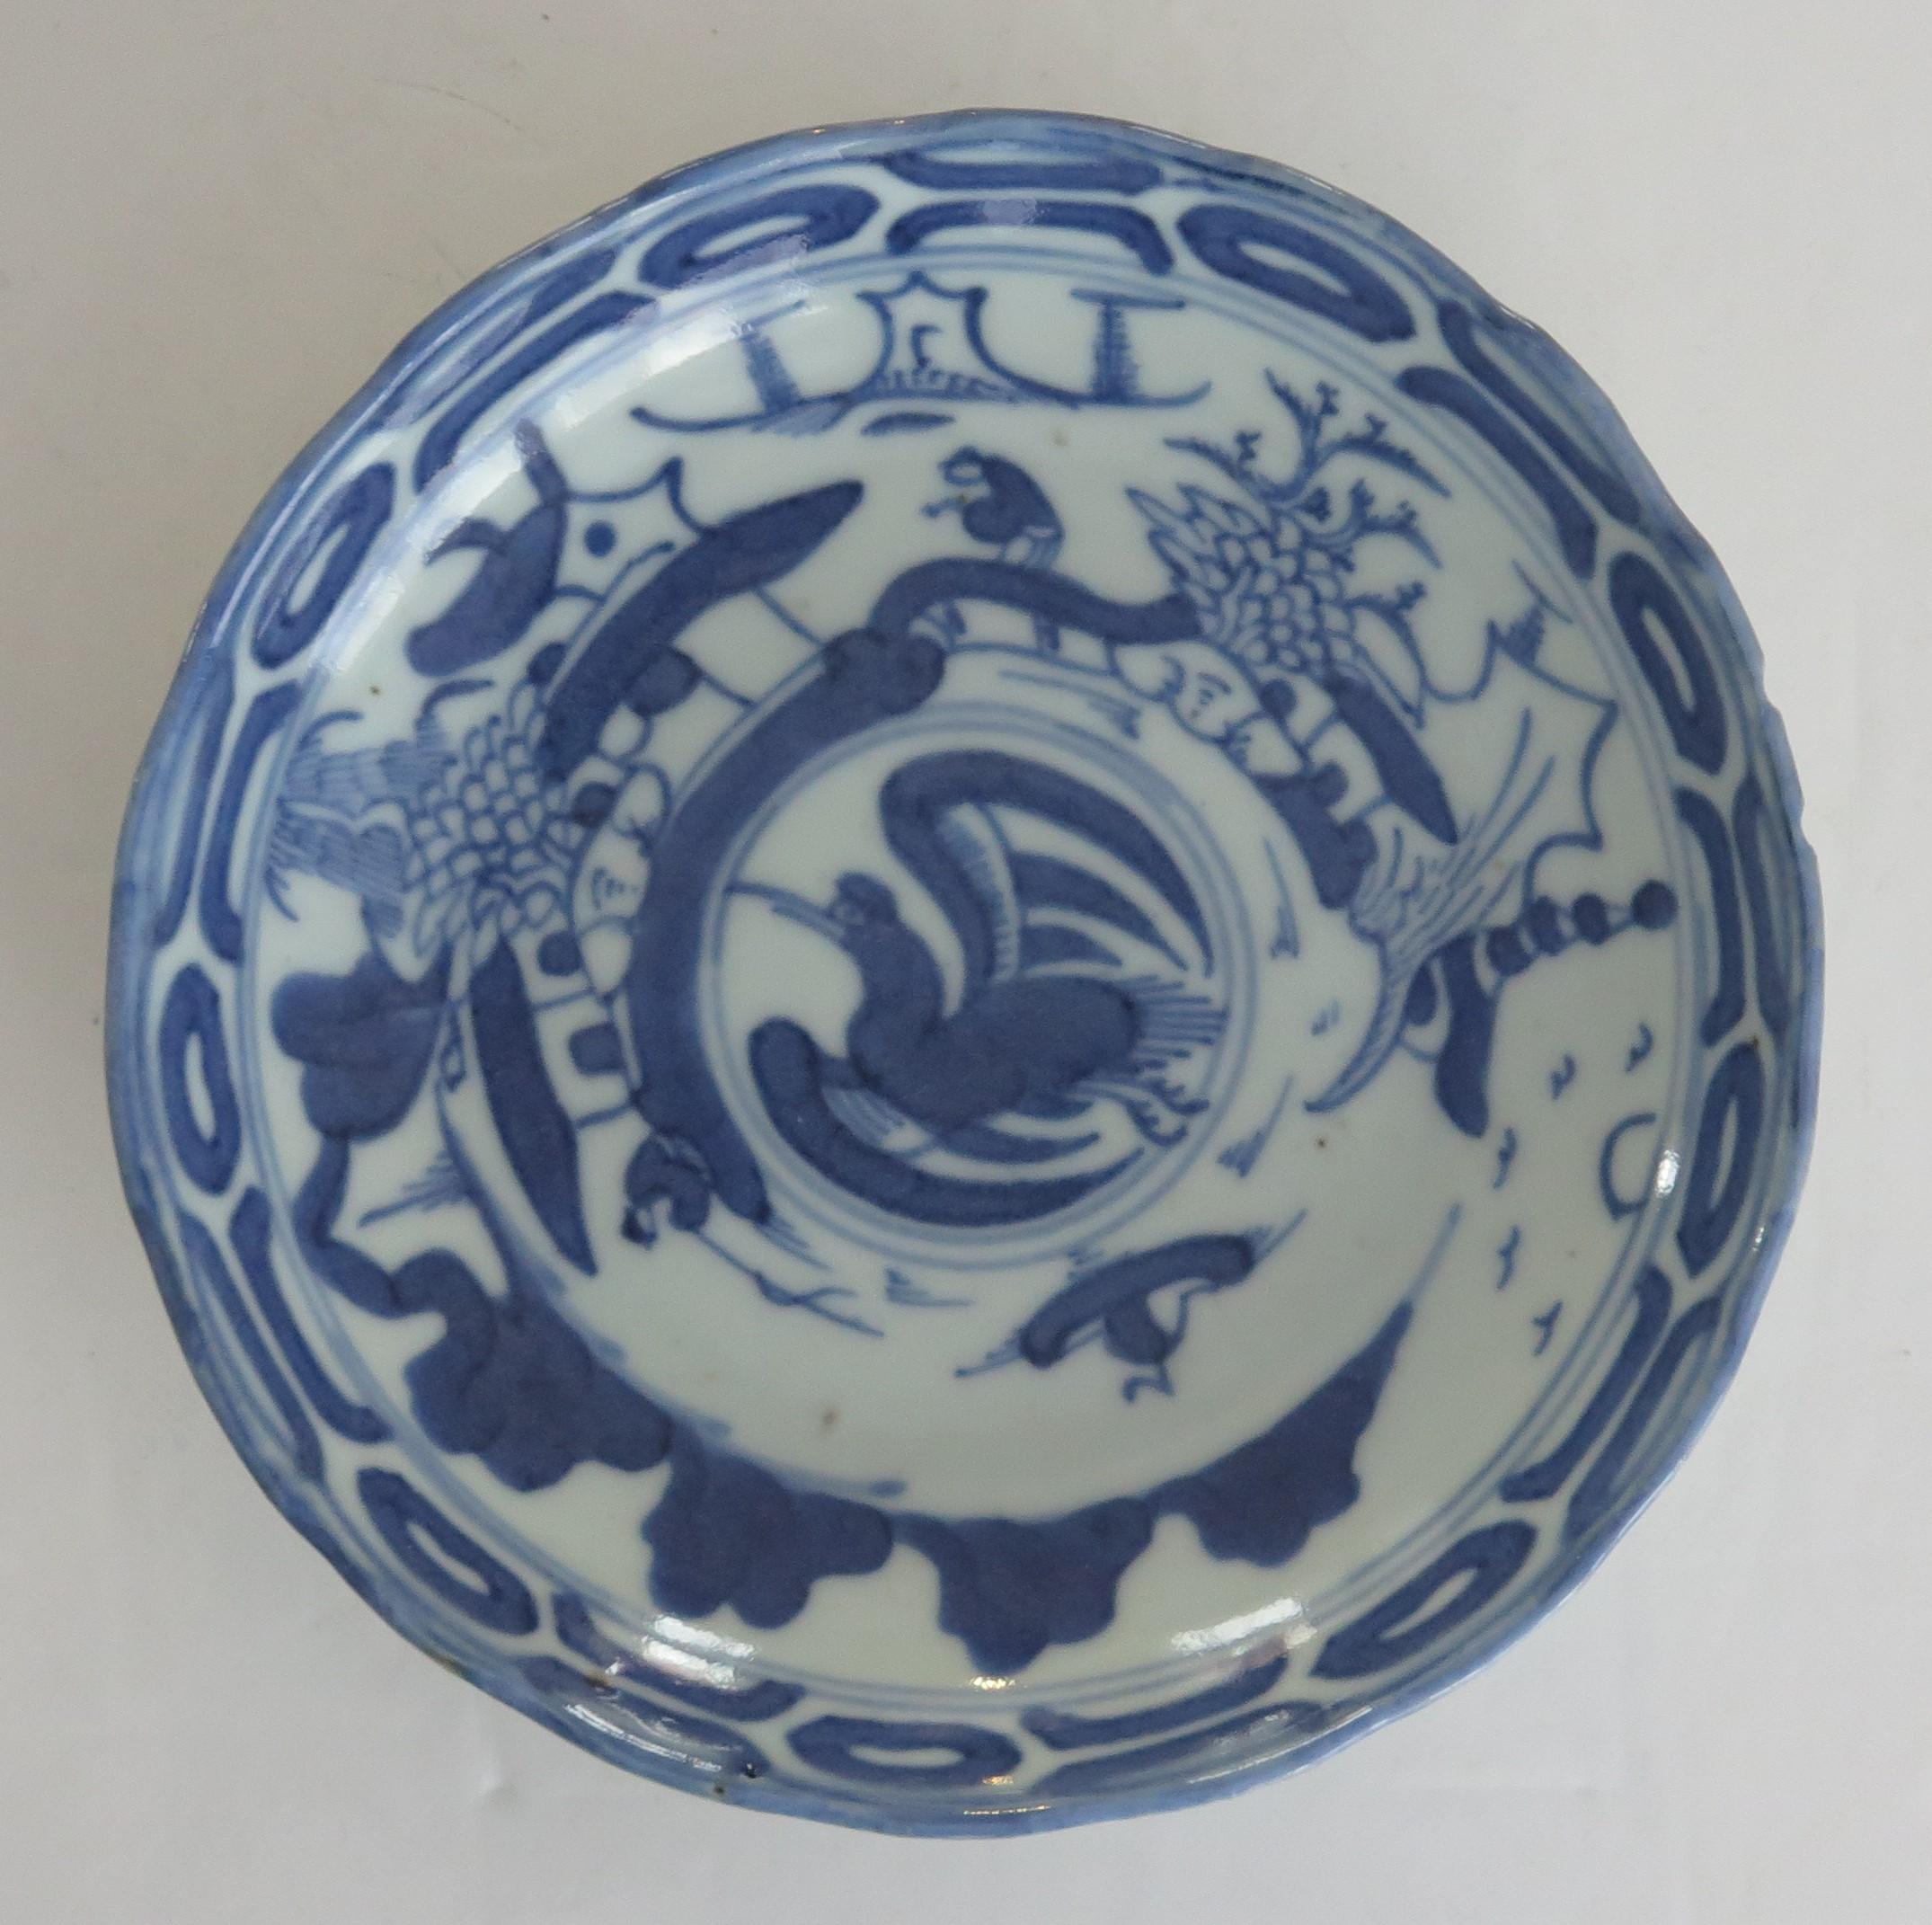 This is a hand painted Chinese Export porcelain dish, which we date to the 17th century, Ming Dynasty, Tianqi or Chongzhen c.1620-1640

The dish is fairly thickly potted with a fairly high, slightly undercut foot and a wavy indented rim.

The